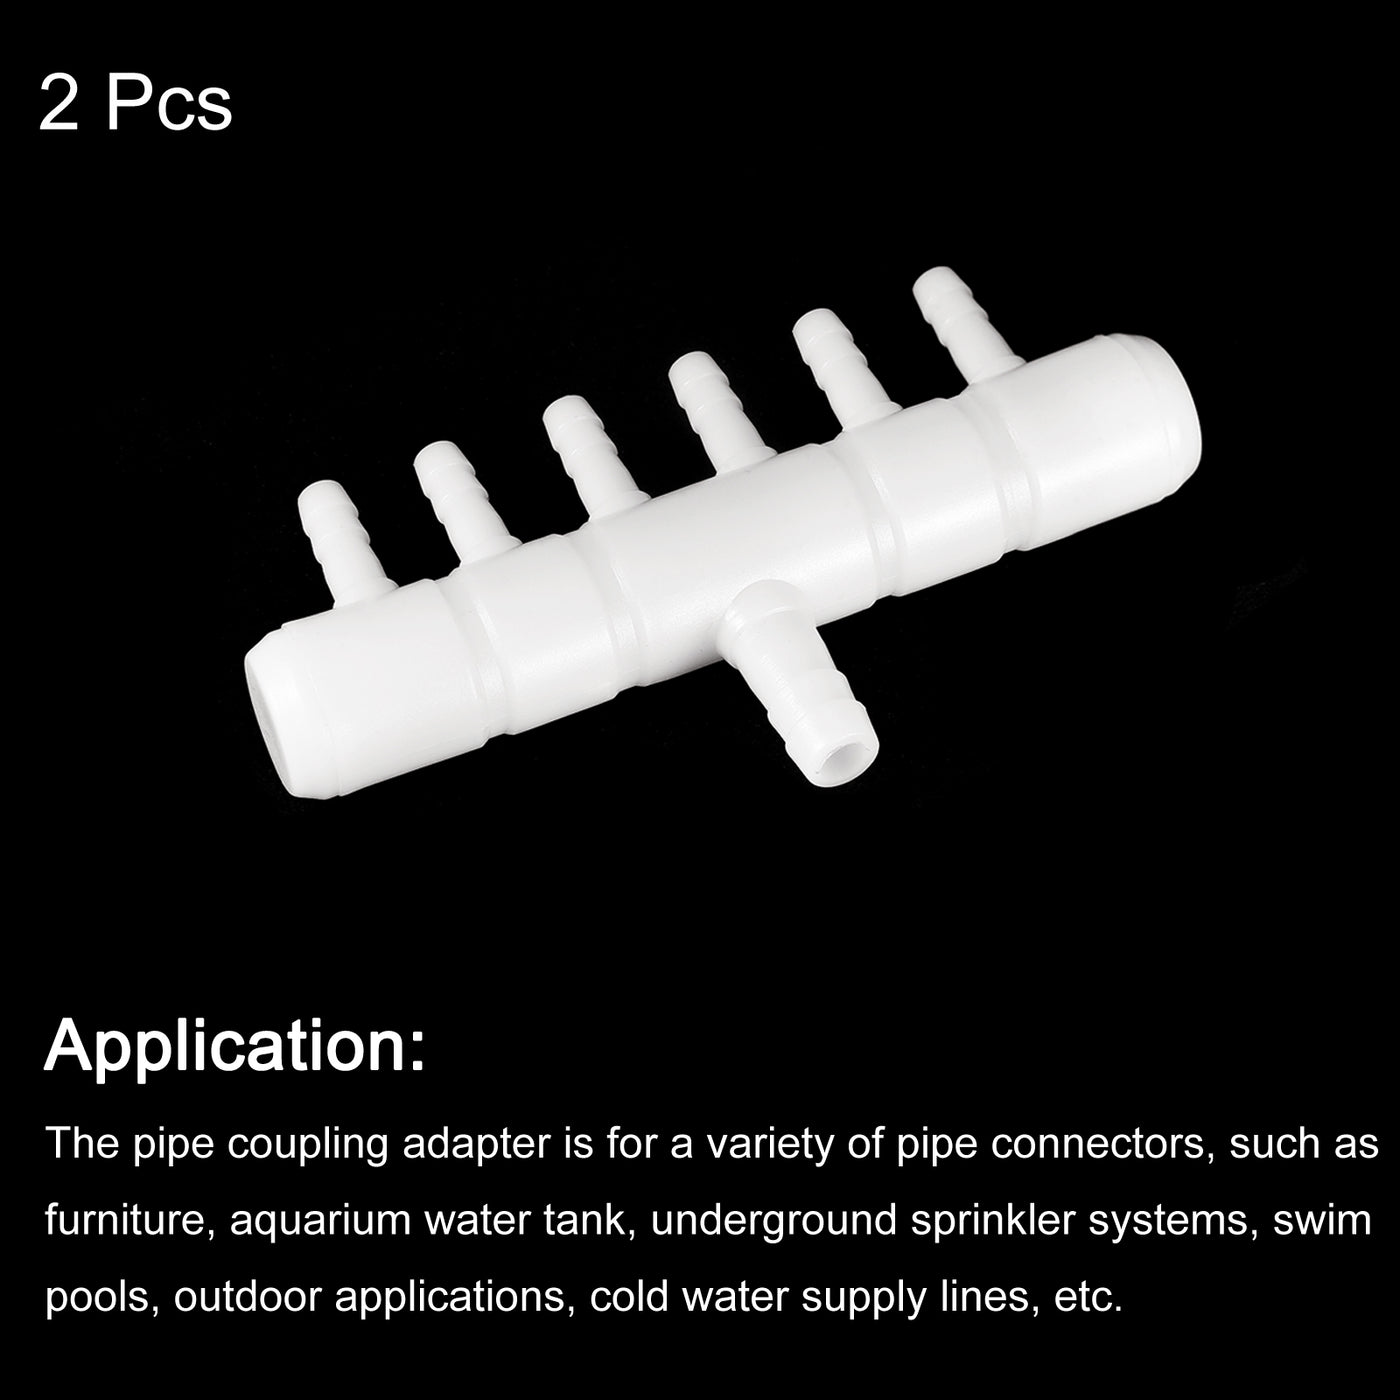 uxcell Uxcell Air Line Tubing Splitter Connector, 2Pcs 8mm/0.31" to 5mm/0.2" 6 Way, White